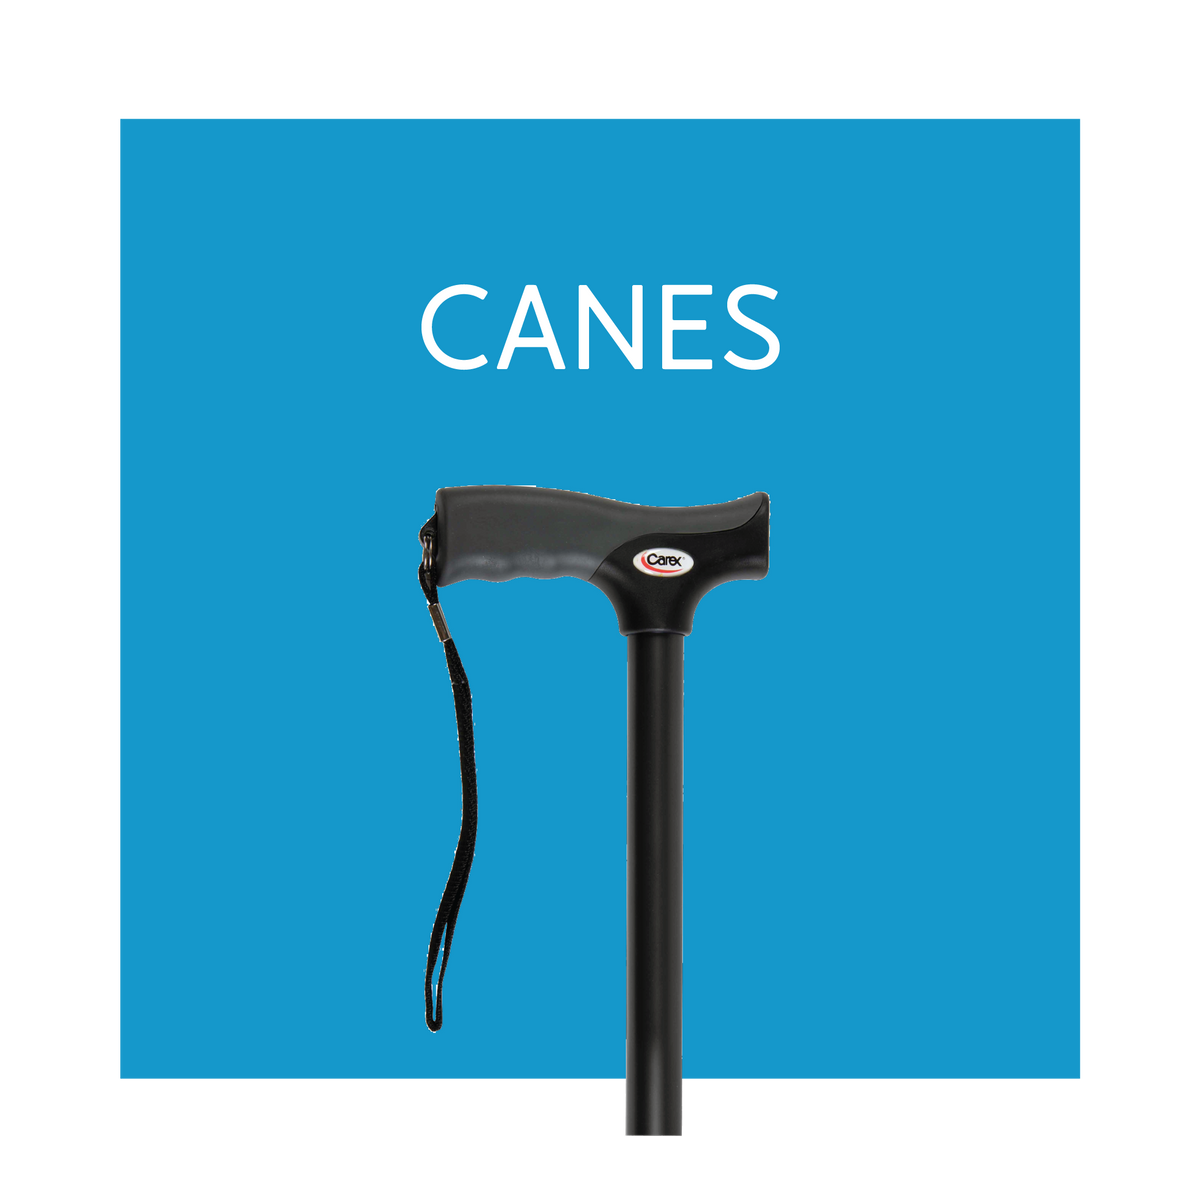 Black derby cane on a blue background. Text, “Canes”